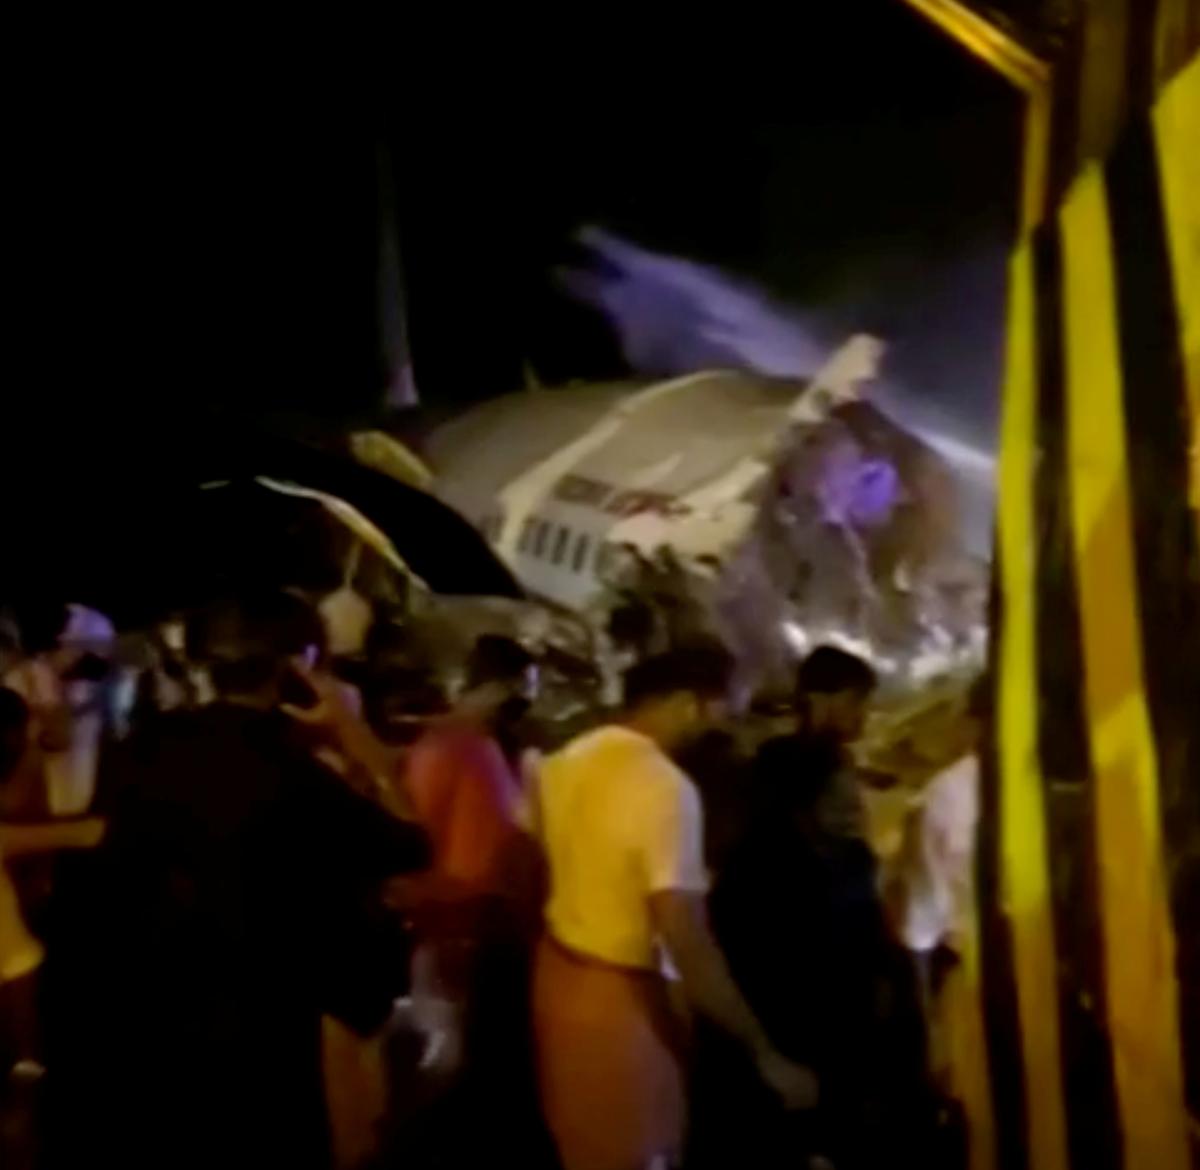 A passenger plane that crashed after it overshot the runway is seen at Calicut International Airport in Karipur, southern state of Kerala, India, August 7, 2020, in this still image obtained from a video. Photo: Reuters